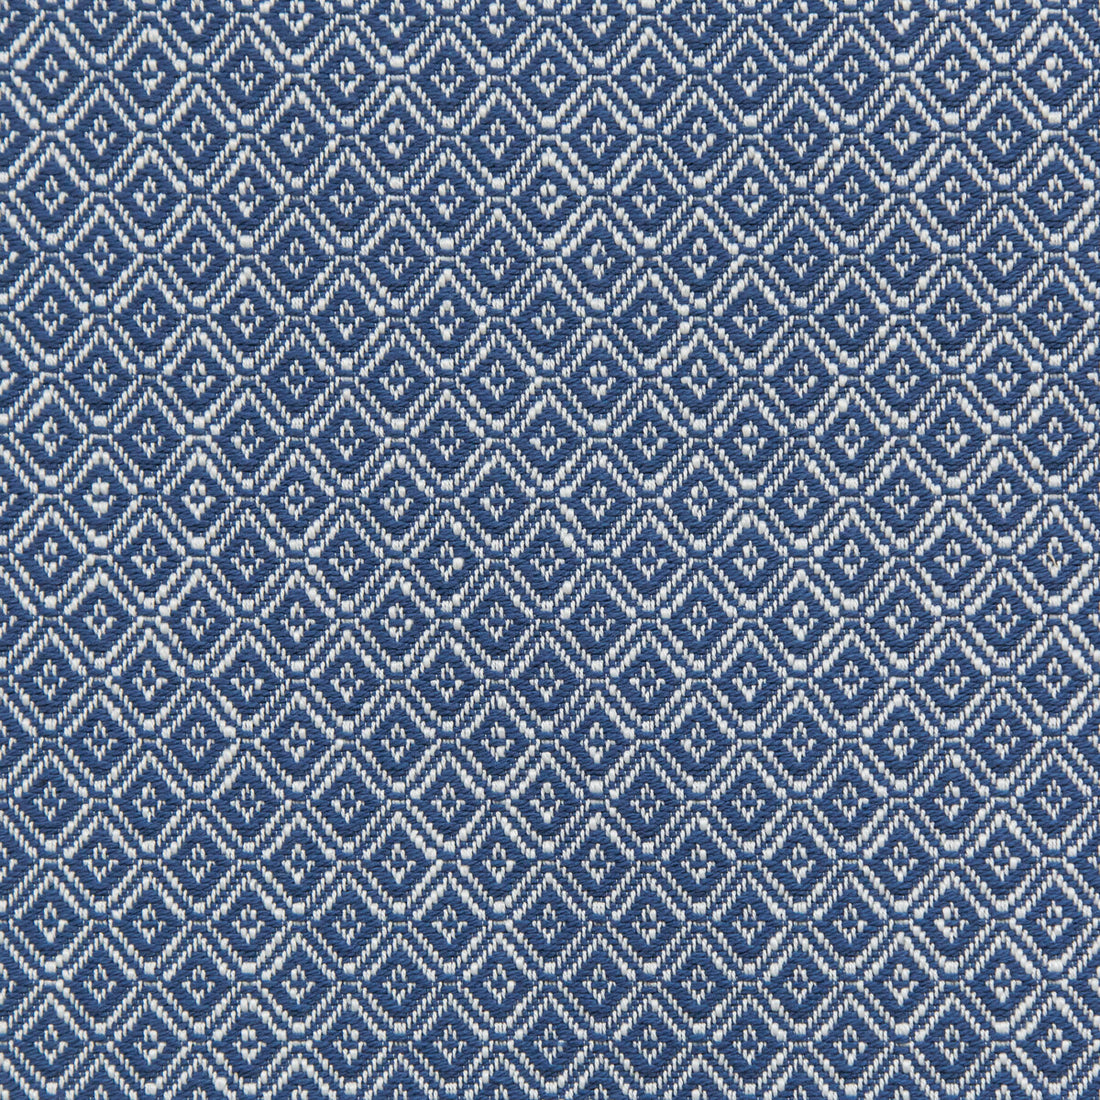 Seaford Weave fabric in blue color - pattern 2020106.5.0 - by Lee Jofa in the Linford Weaves collection